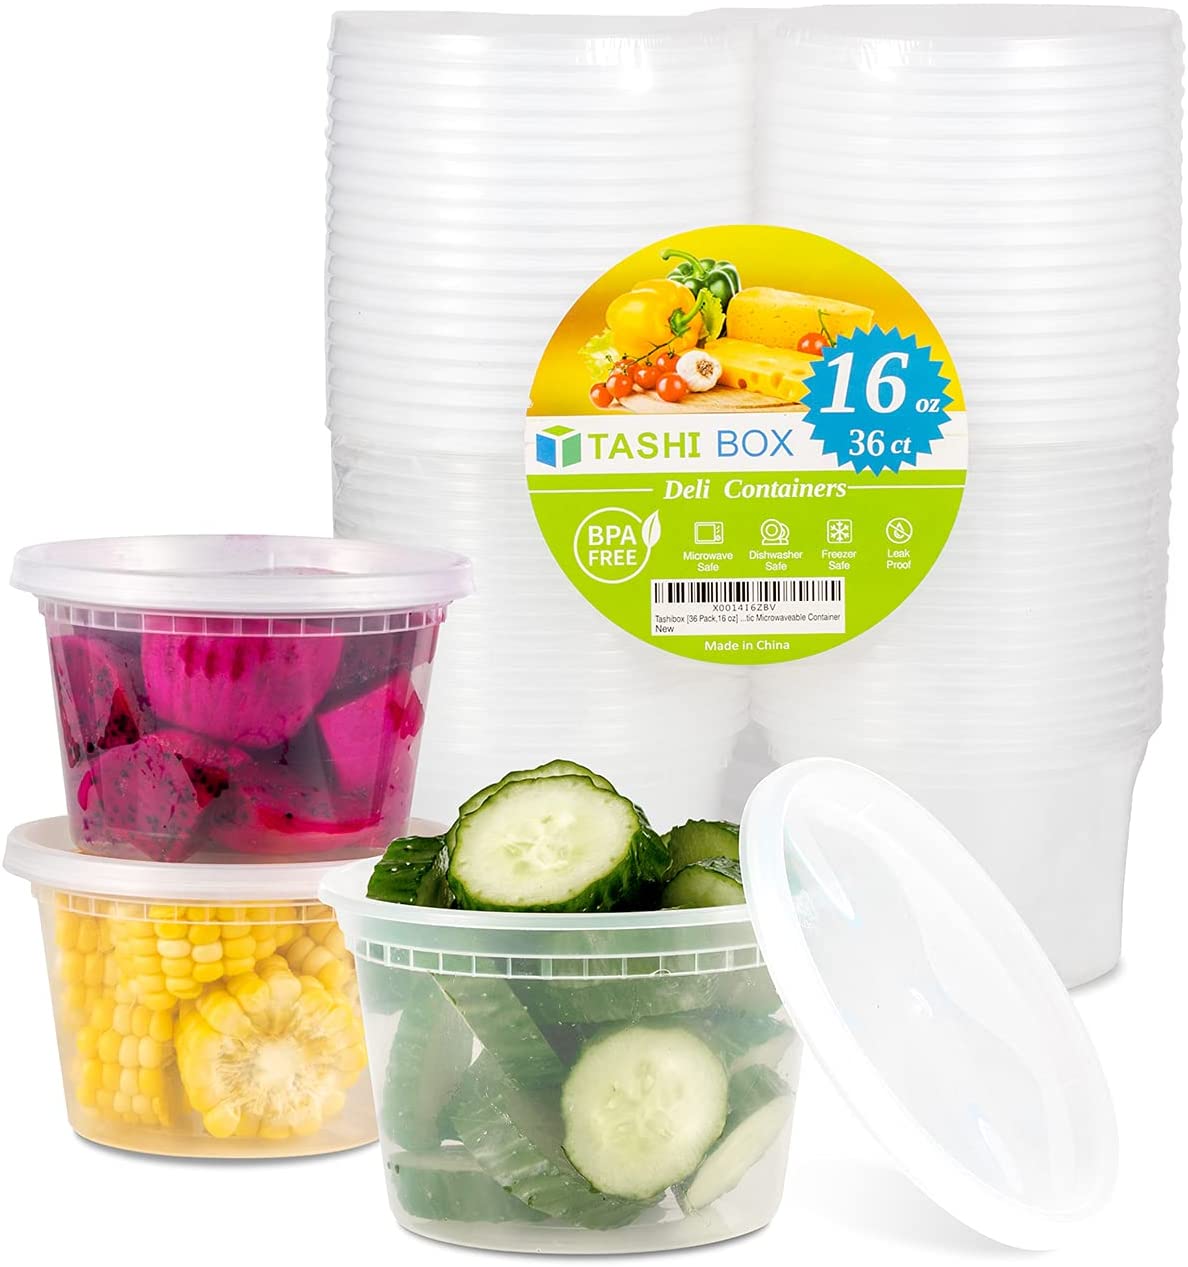 Glotoch 48 Pack 16 oz. (2 Cups) Plastic Food and Drink Storage Containers  Set with Lids - Microwave, Freezer & Dishwasher Safe Eco-Friendly,  BPA-Free, Reusable …